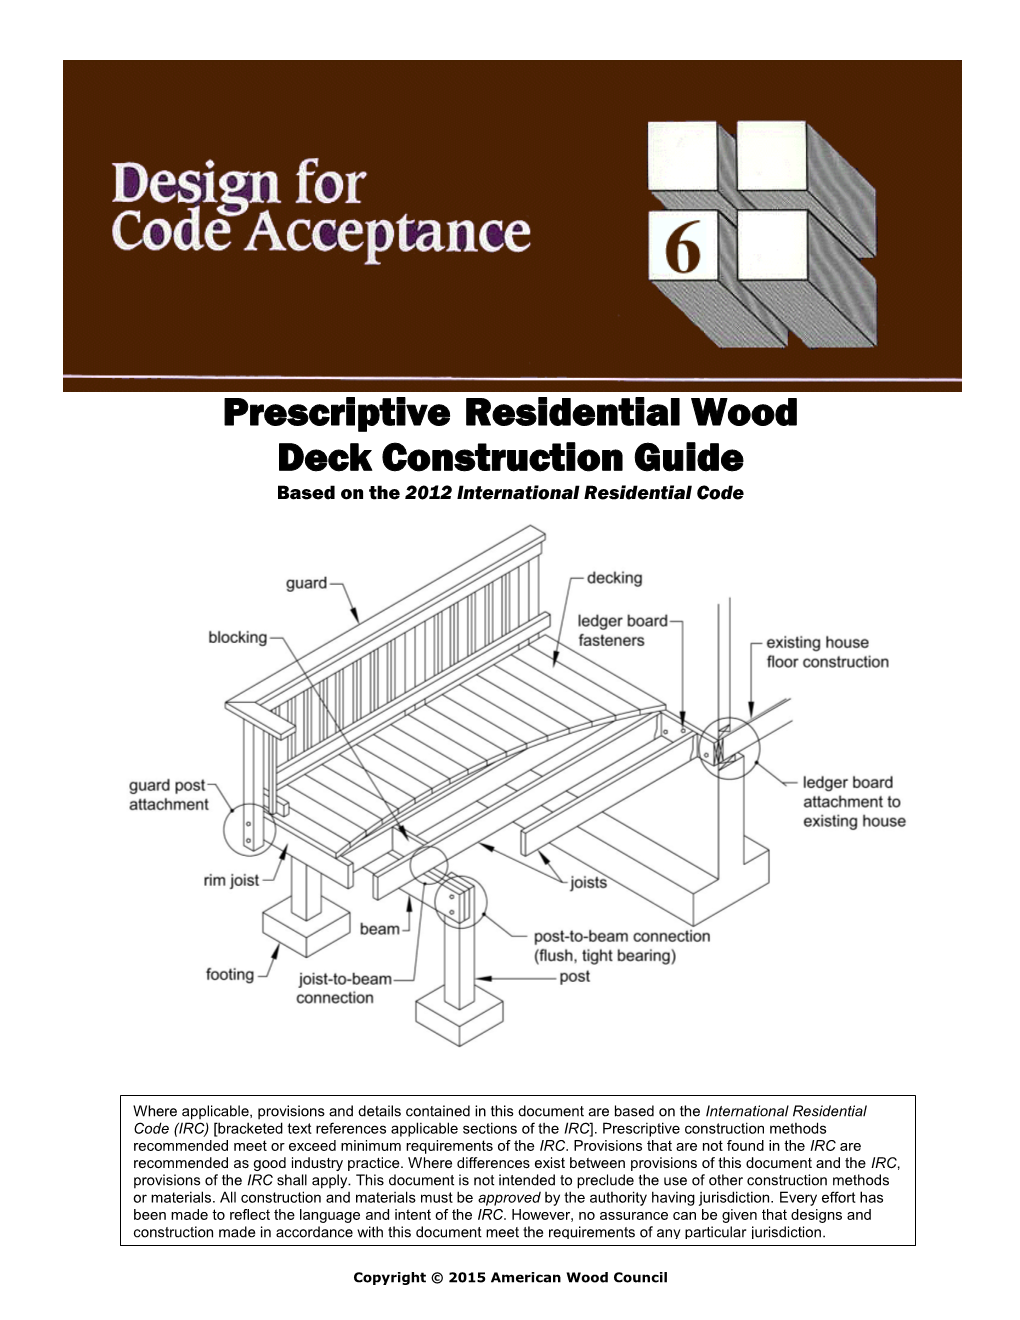 Prescriptive Residential Wood Deck Construction Guide Based on the 2012 International Residential Code